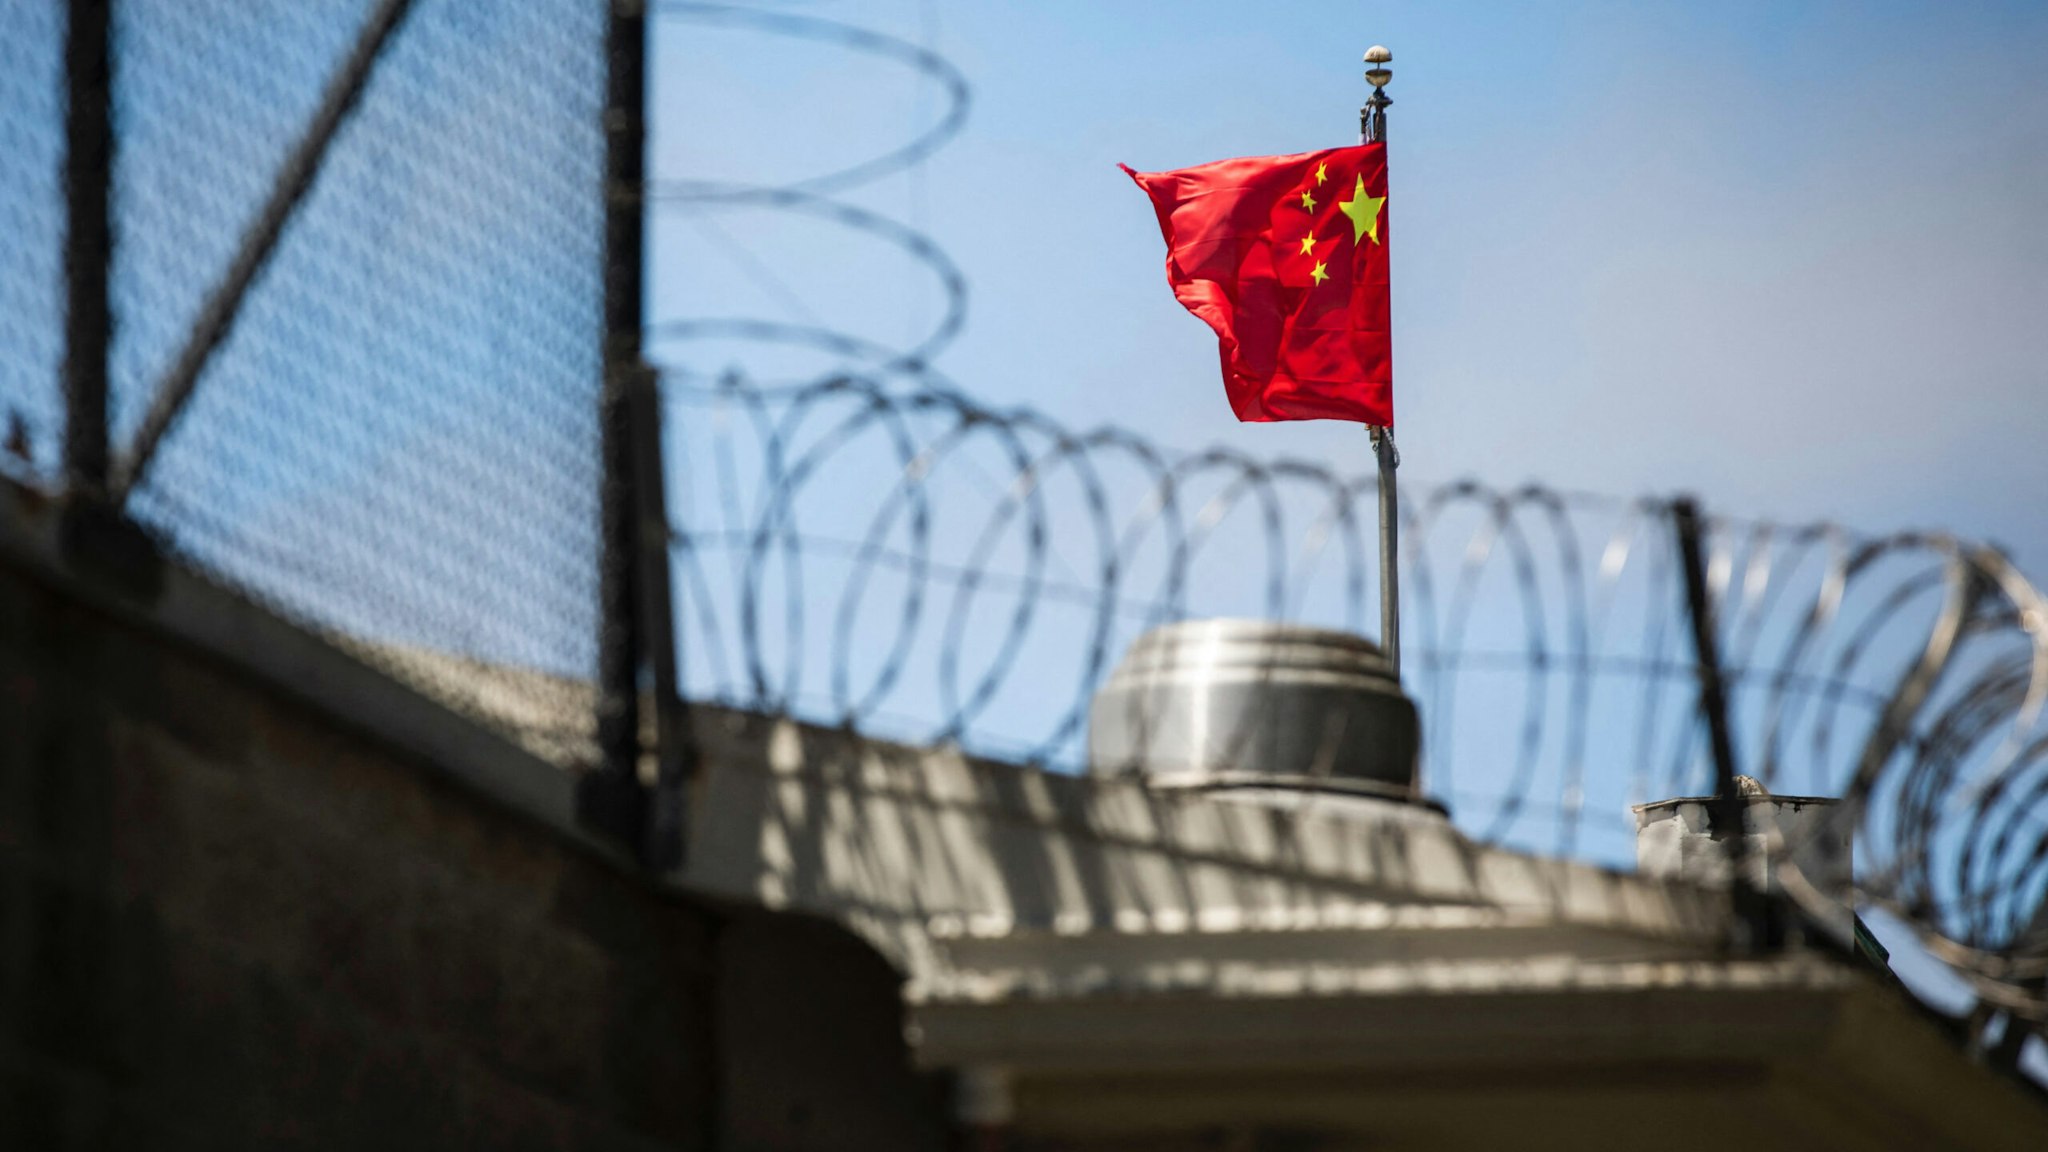 The flag of the People's Republic of China flies behind barbed wire at the Consulate General of the People's Republic of China in San Francisco, California on July 23, 2020.